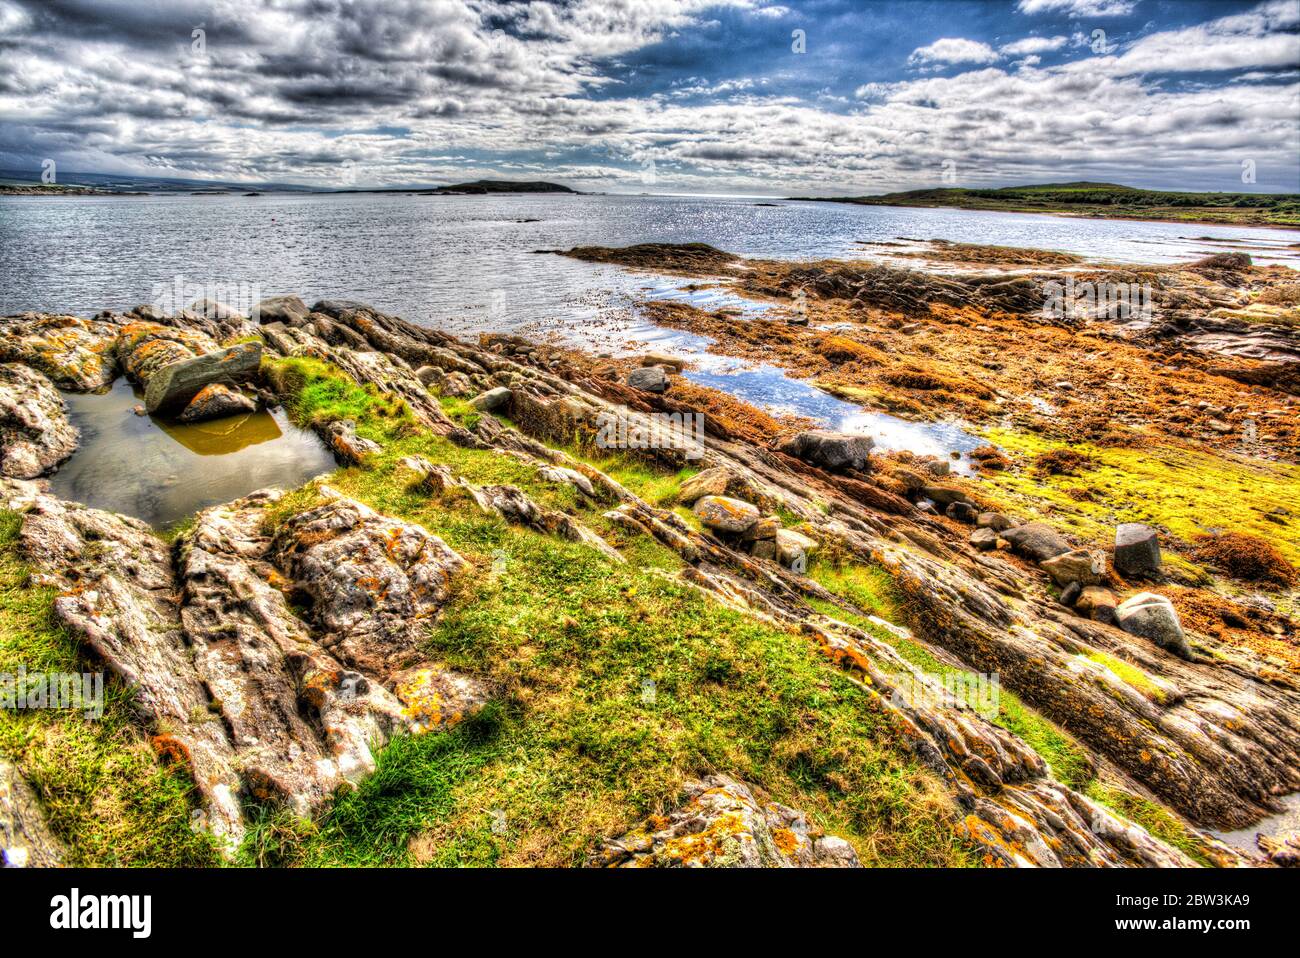 Isle of Gigha, Scotland. Artistic tranquil view of the coastline at Caolas Gigalum, on the south-east coast of the Isle of Gigha. Stock Photo